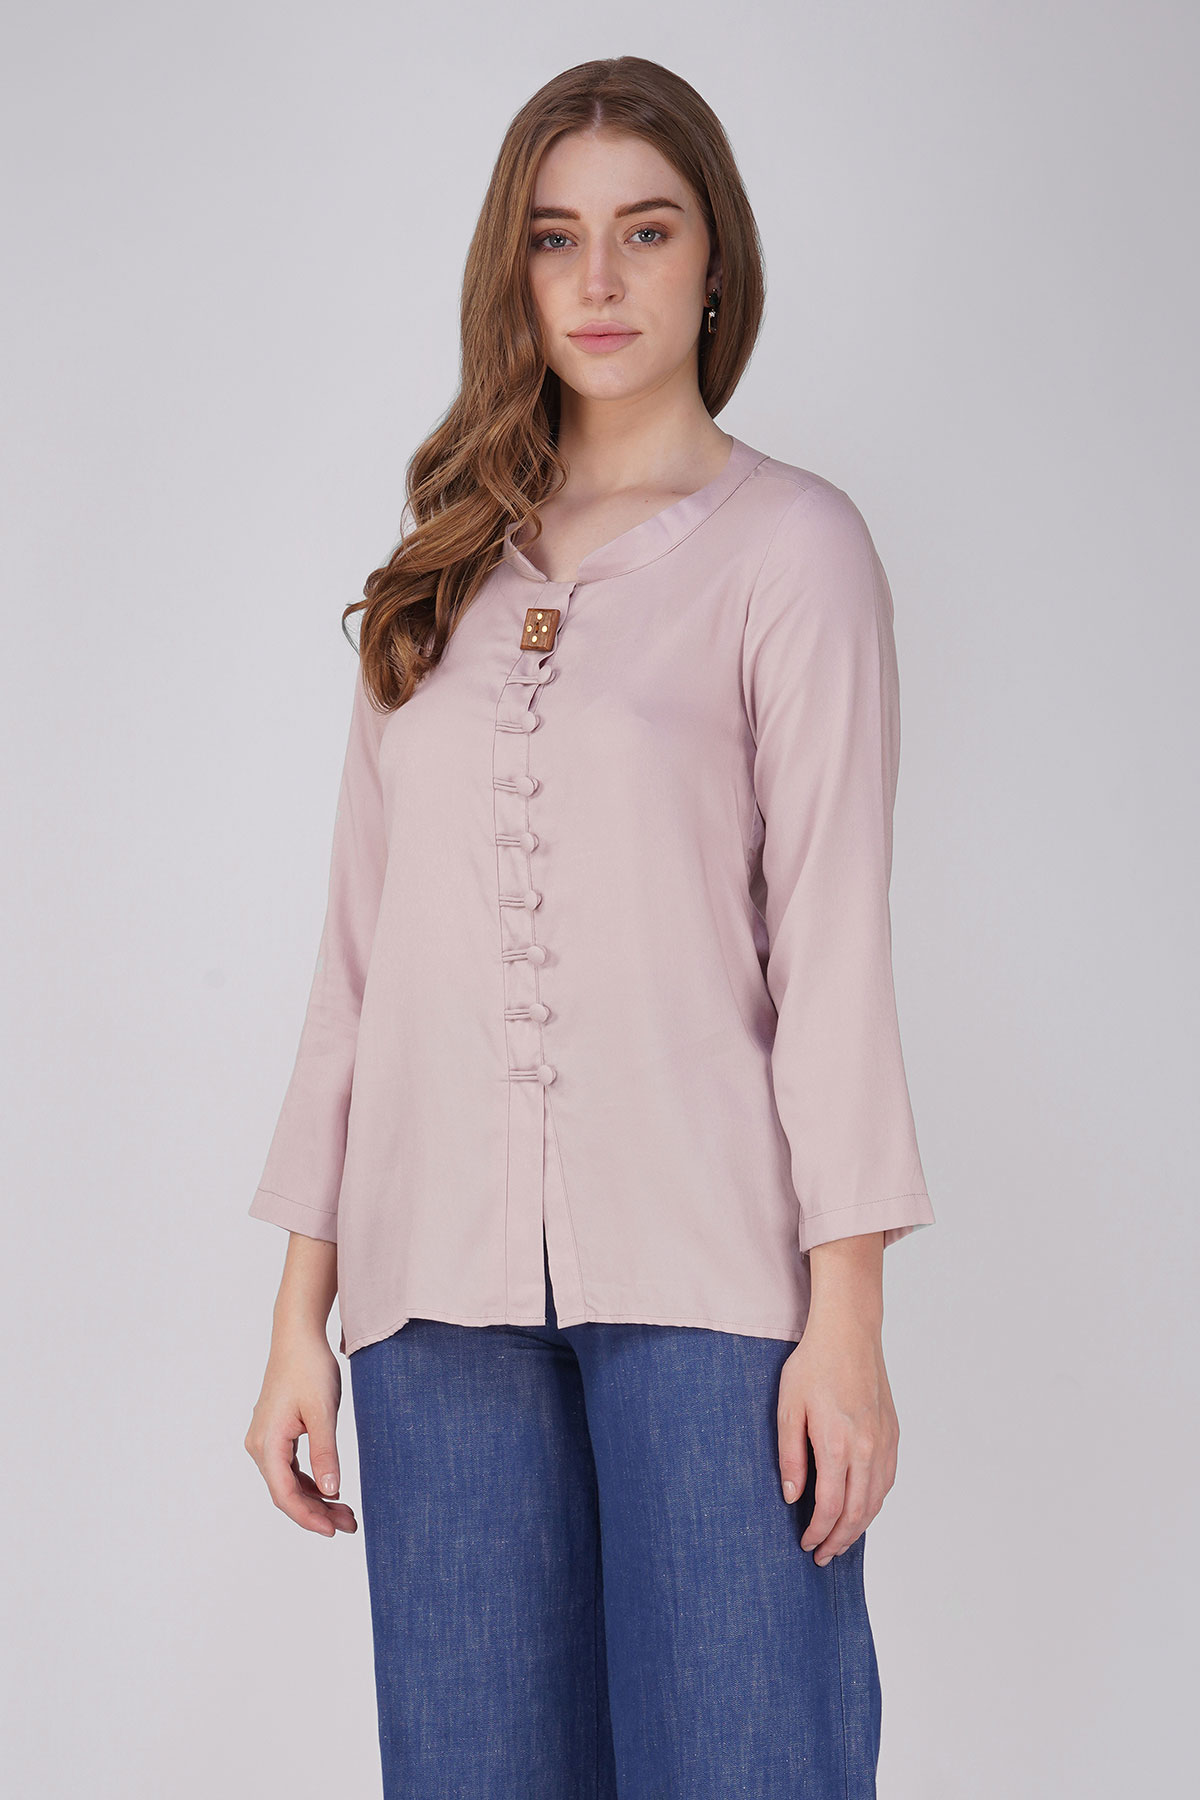 Dusty Pink Top with Statement Wooden Button